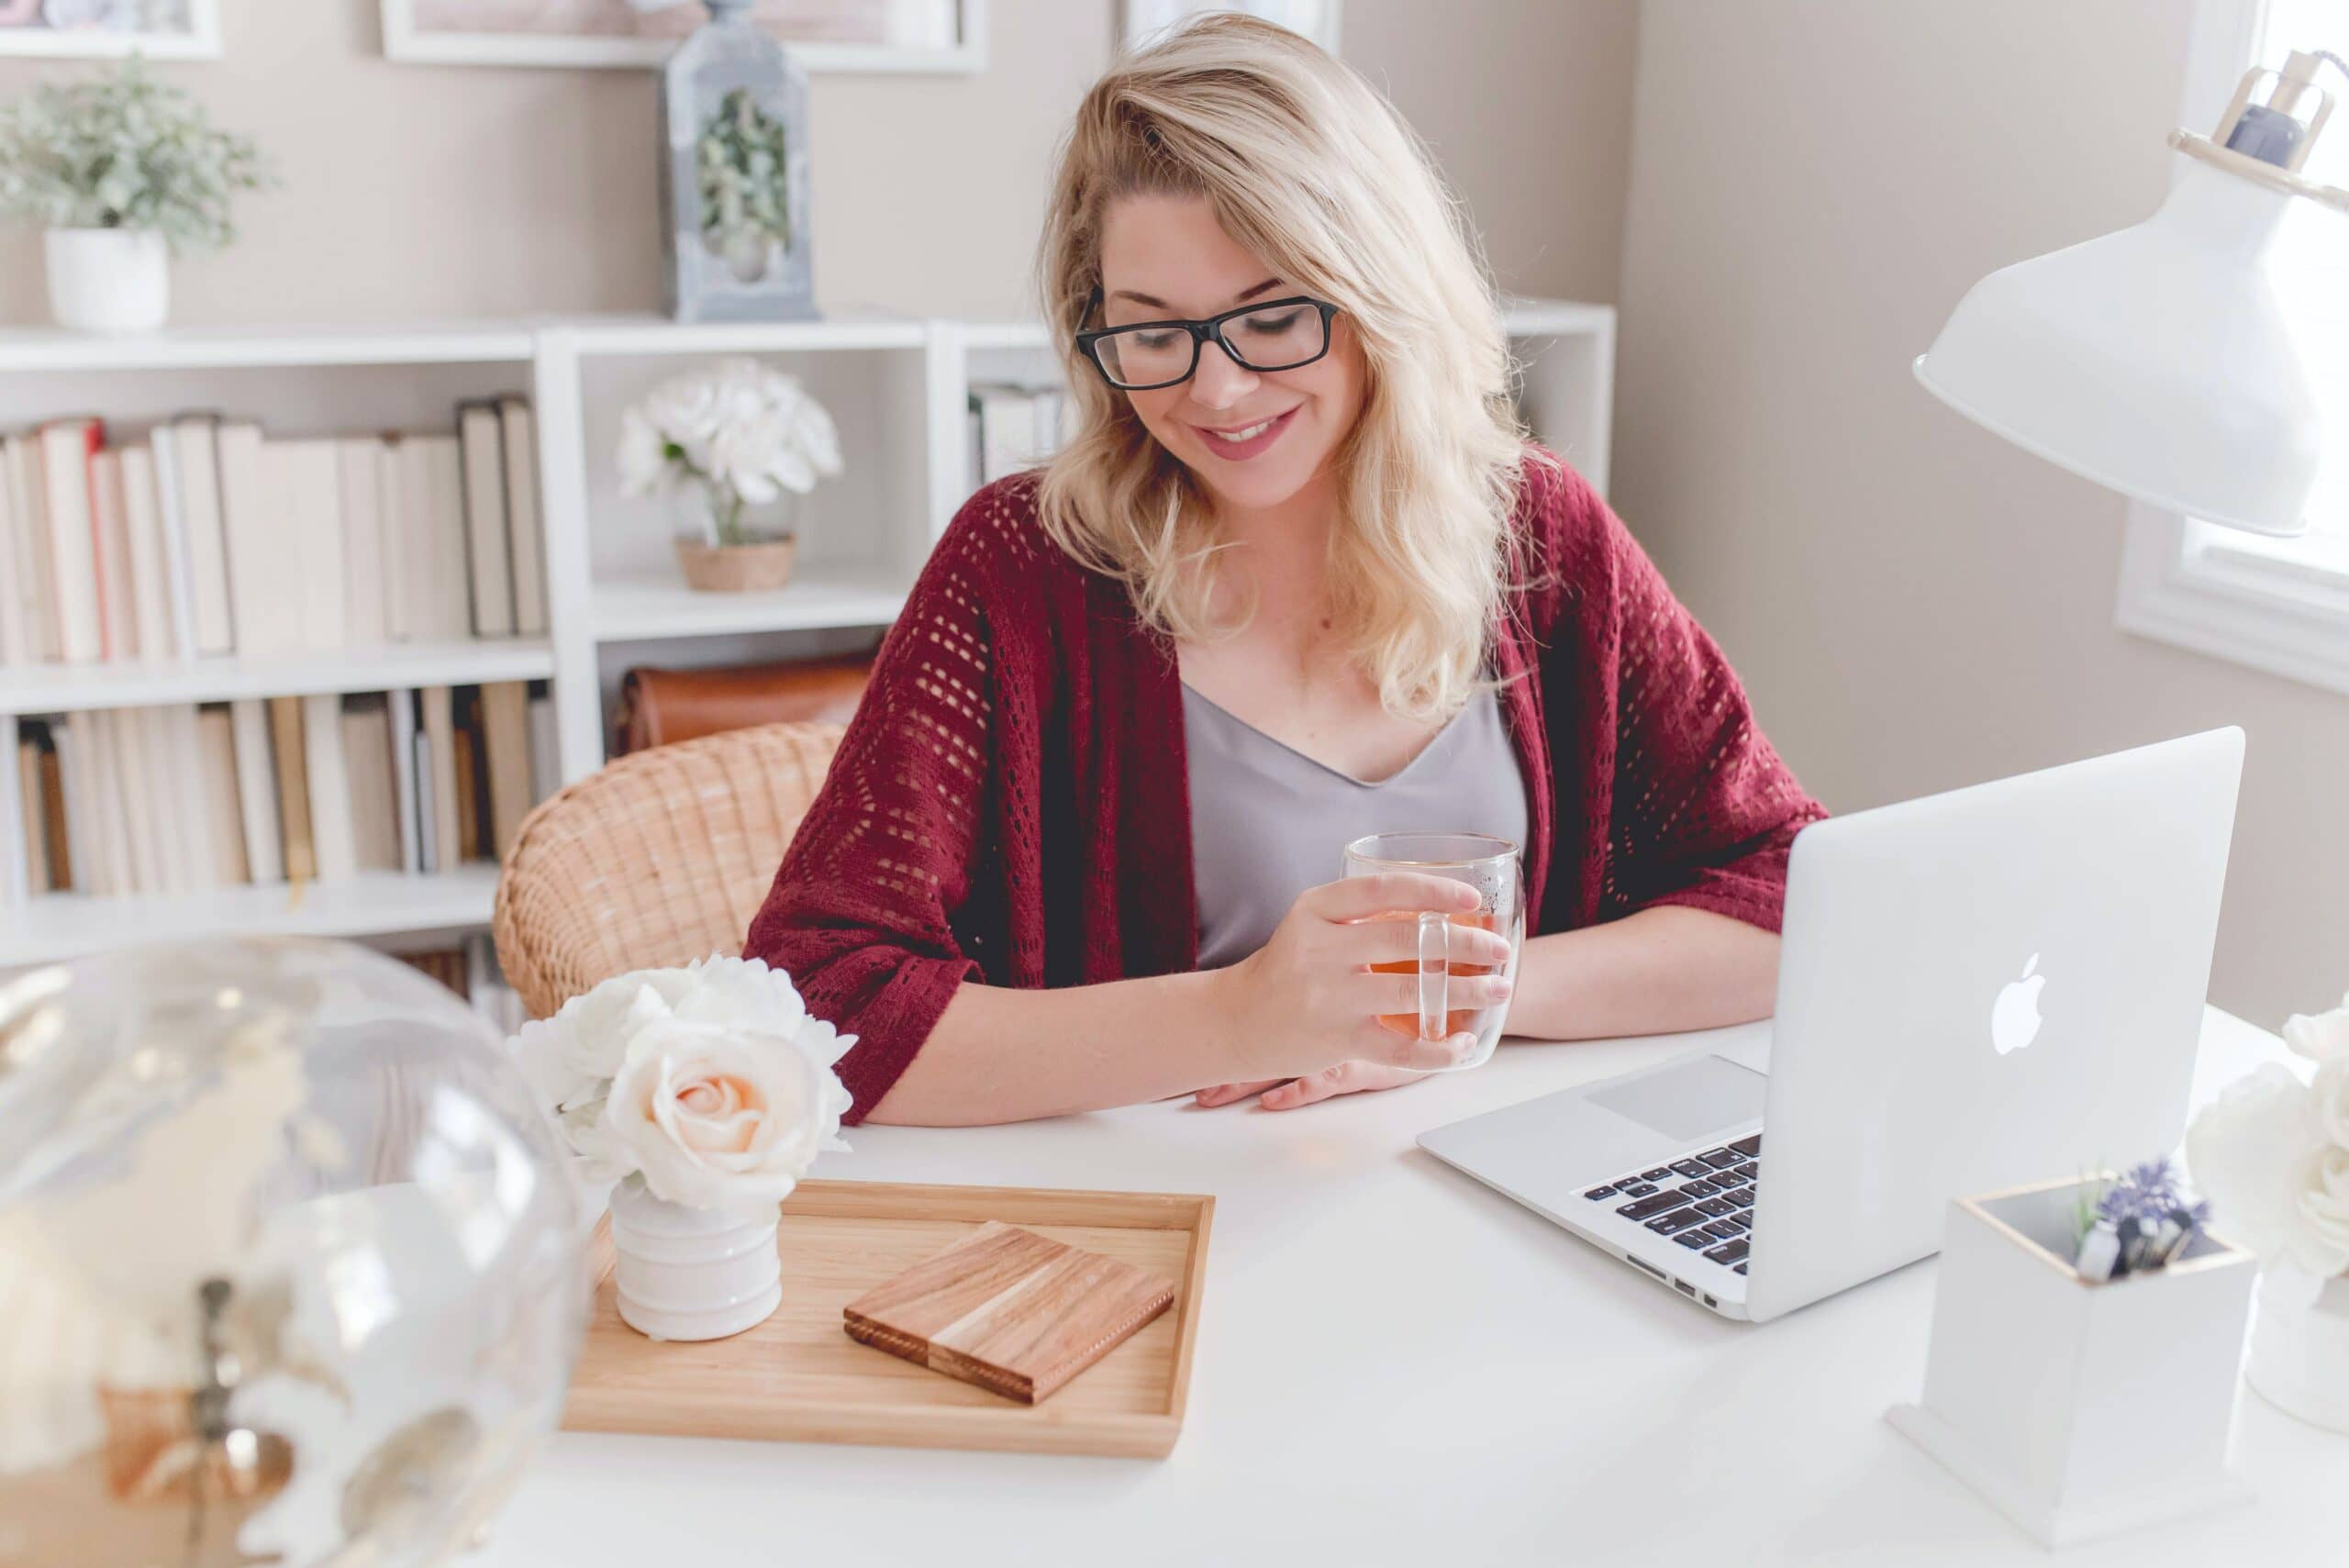 As a freelancer, this woman is her own boss